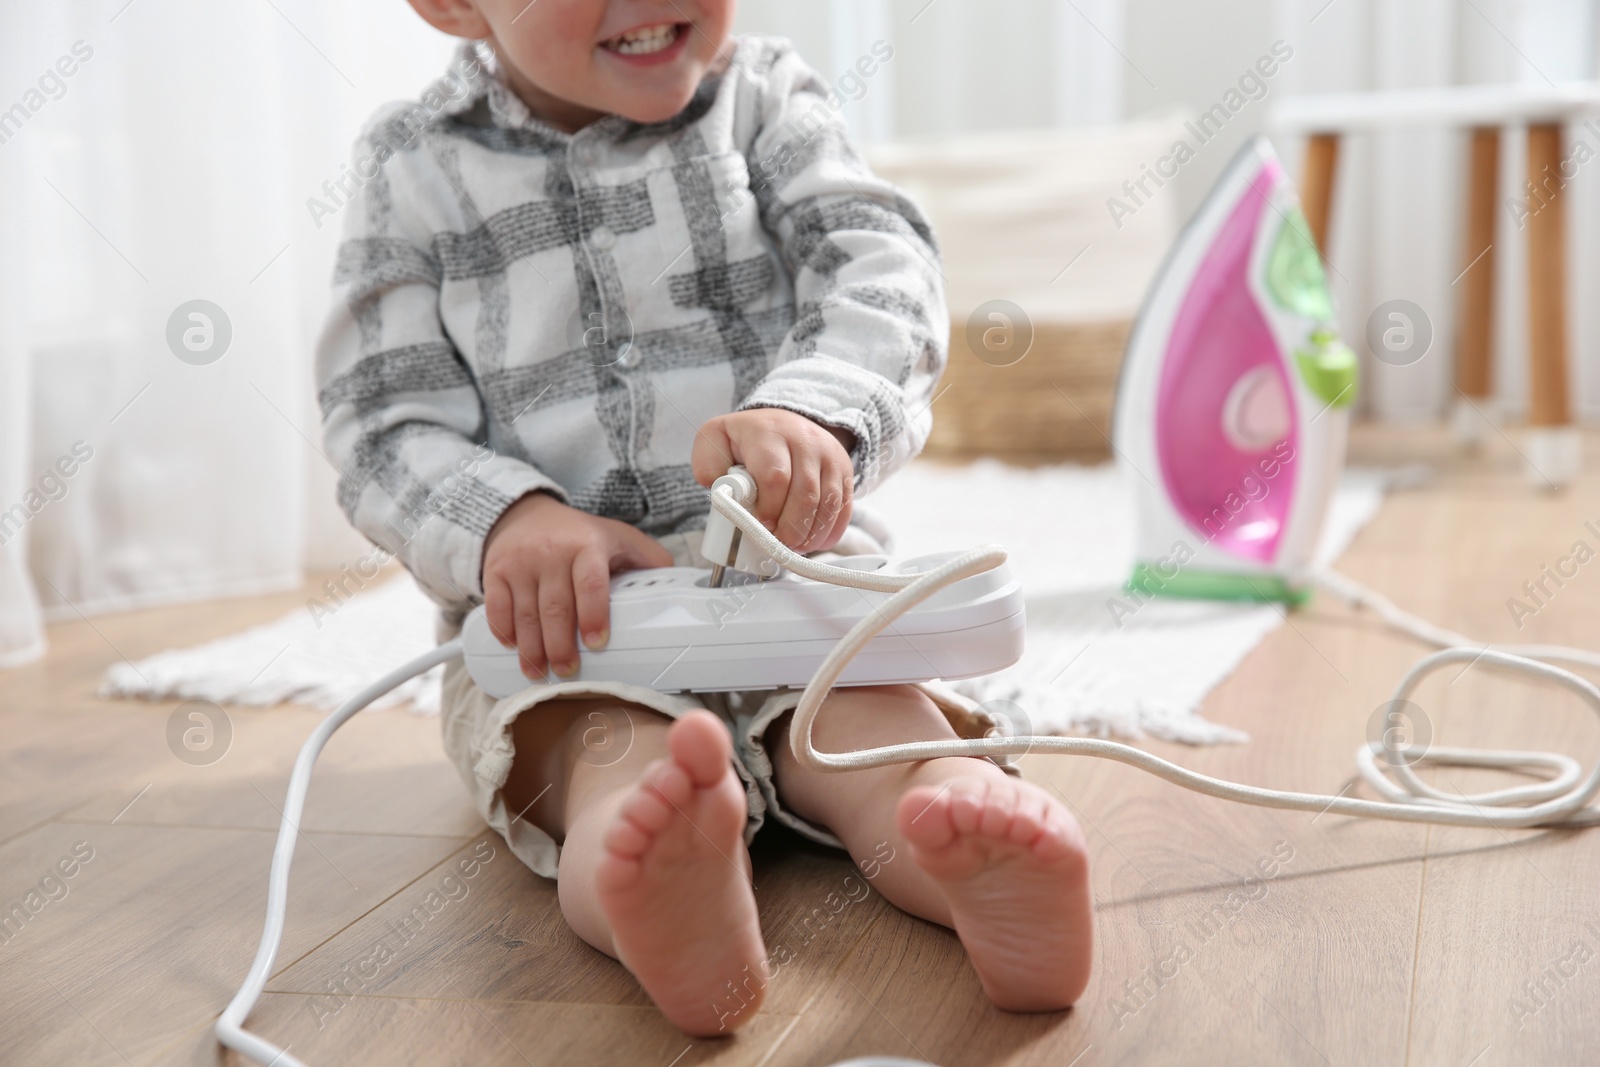 Photo of Little child playing with power strip and iron plug on floor at home, closeup. Dangerous situation